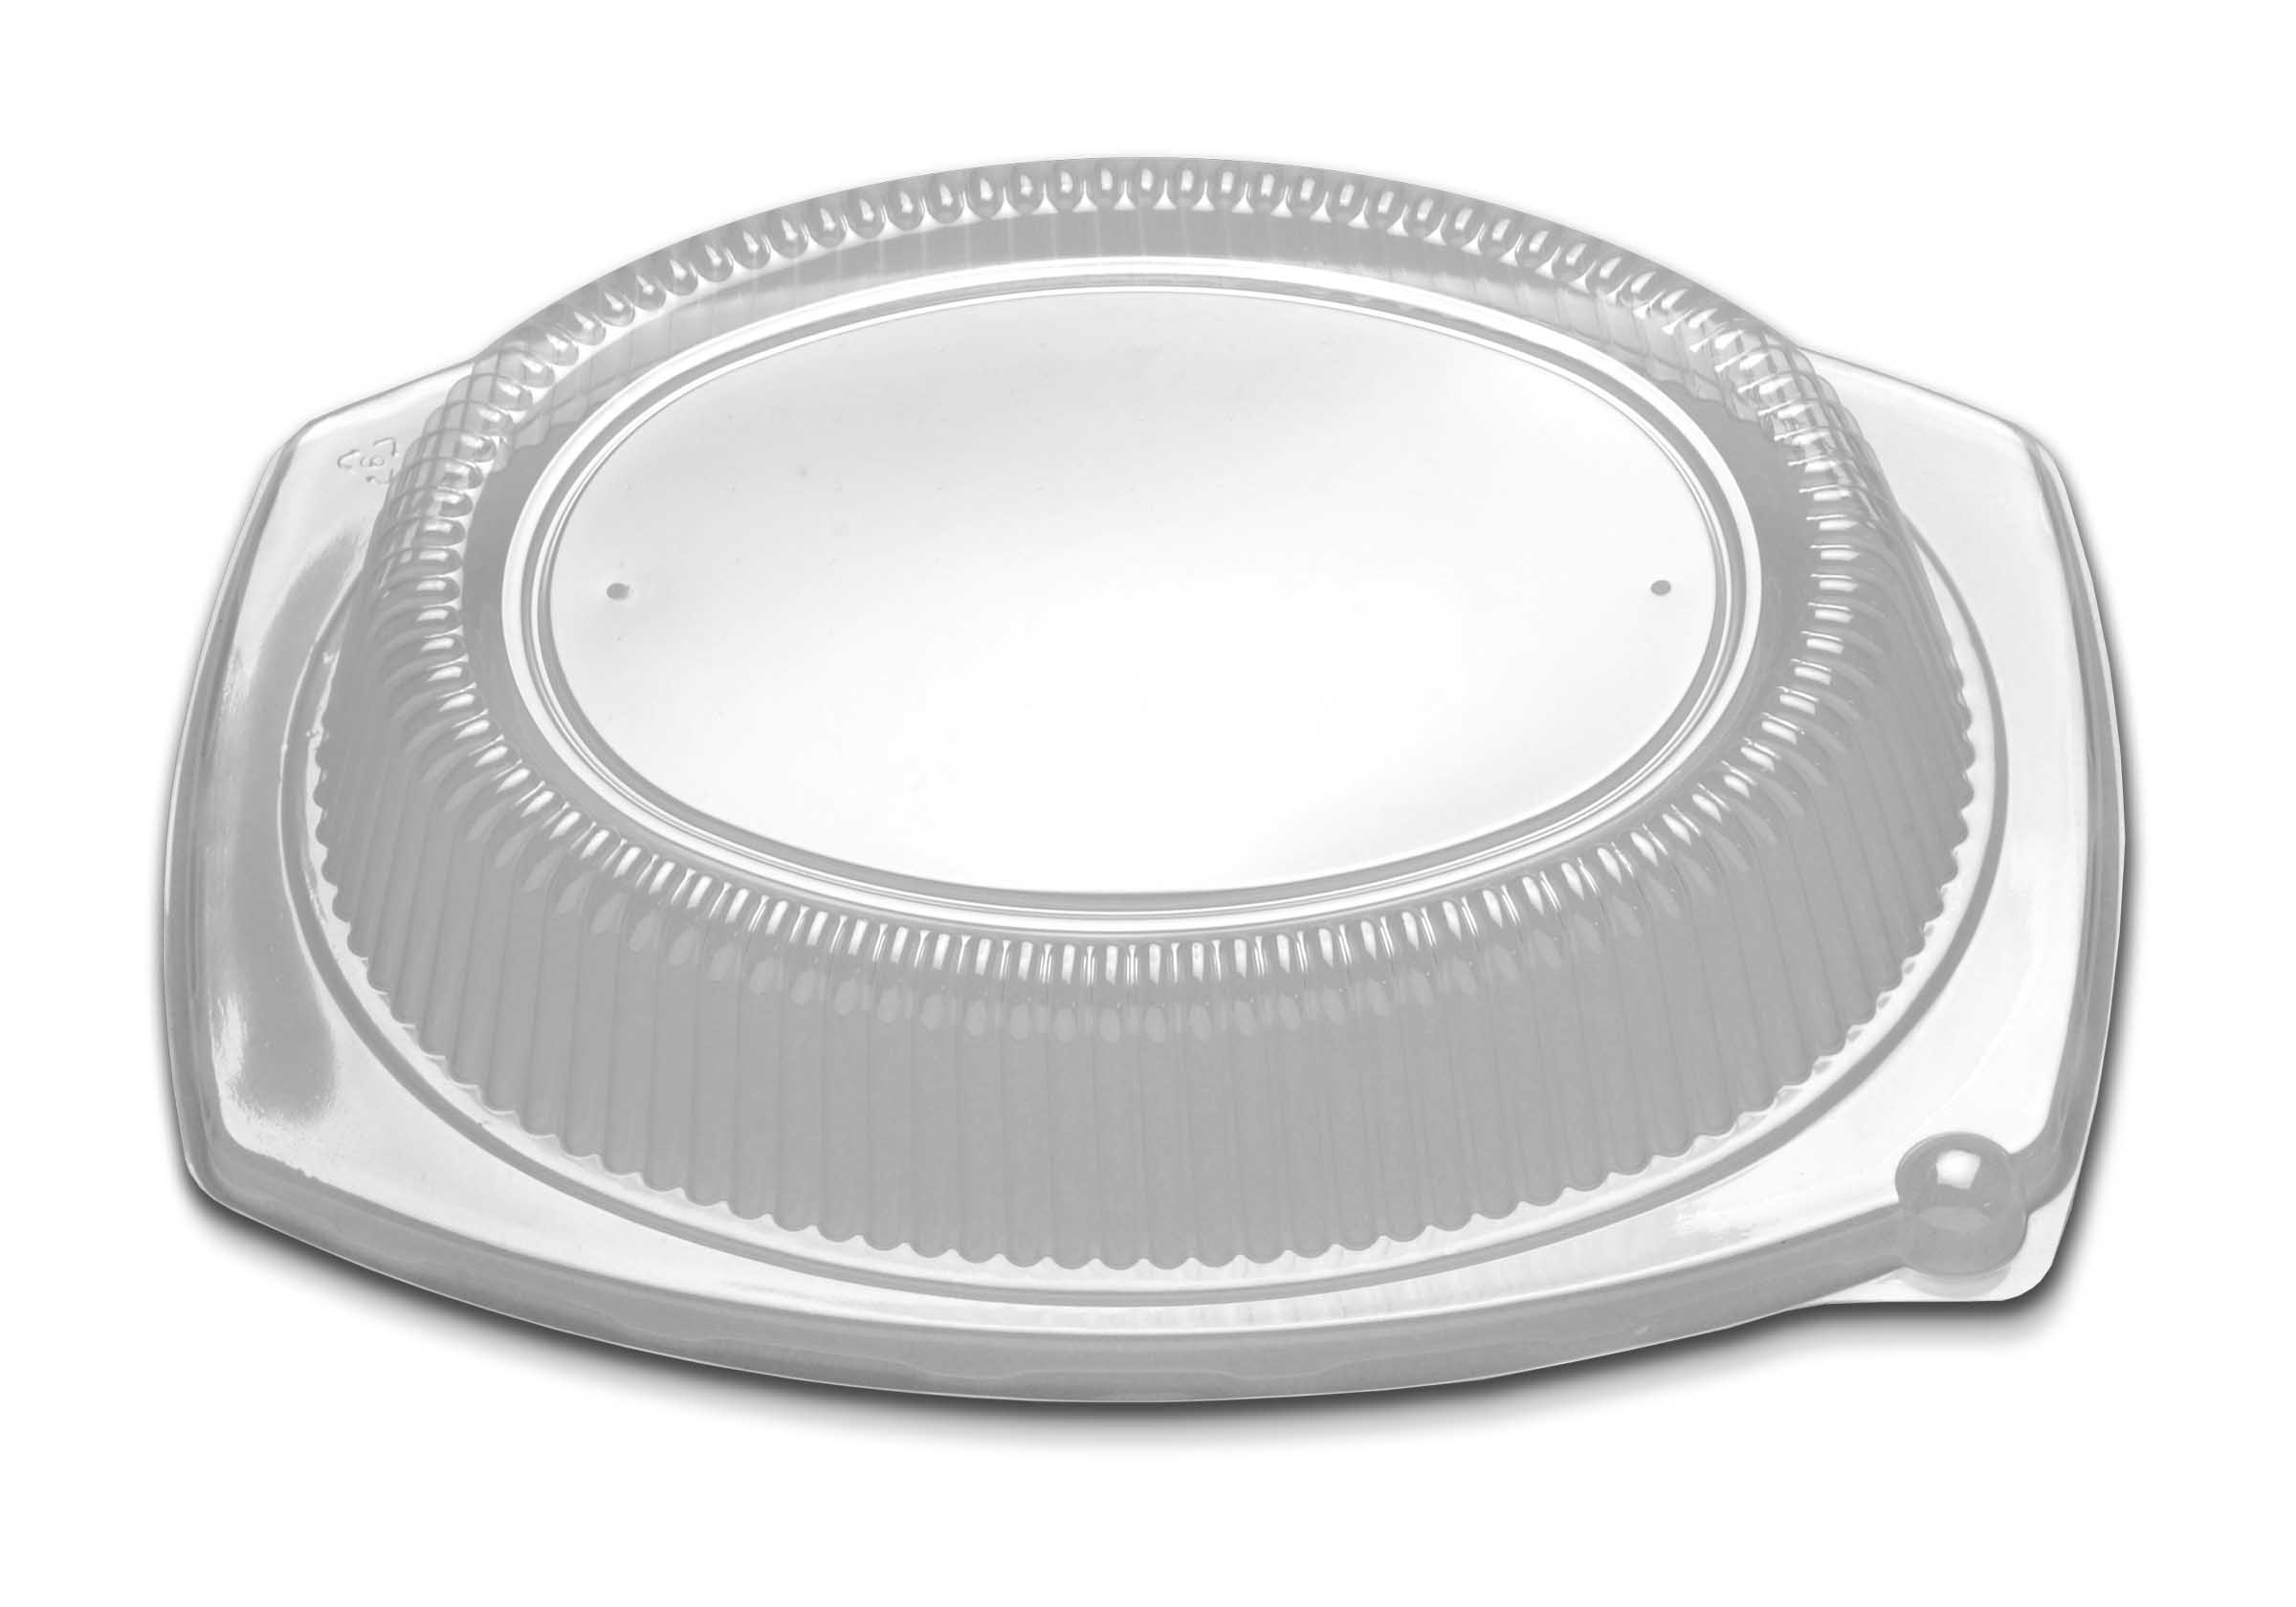 12X9 VENTED OVAL PLATTER LID -CLEAR